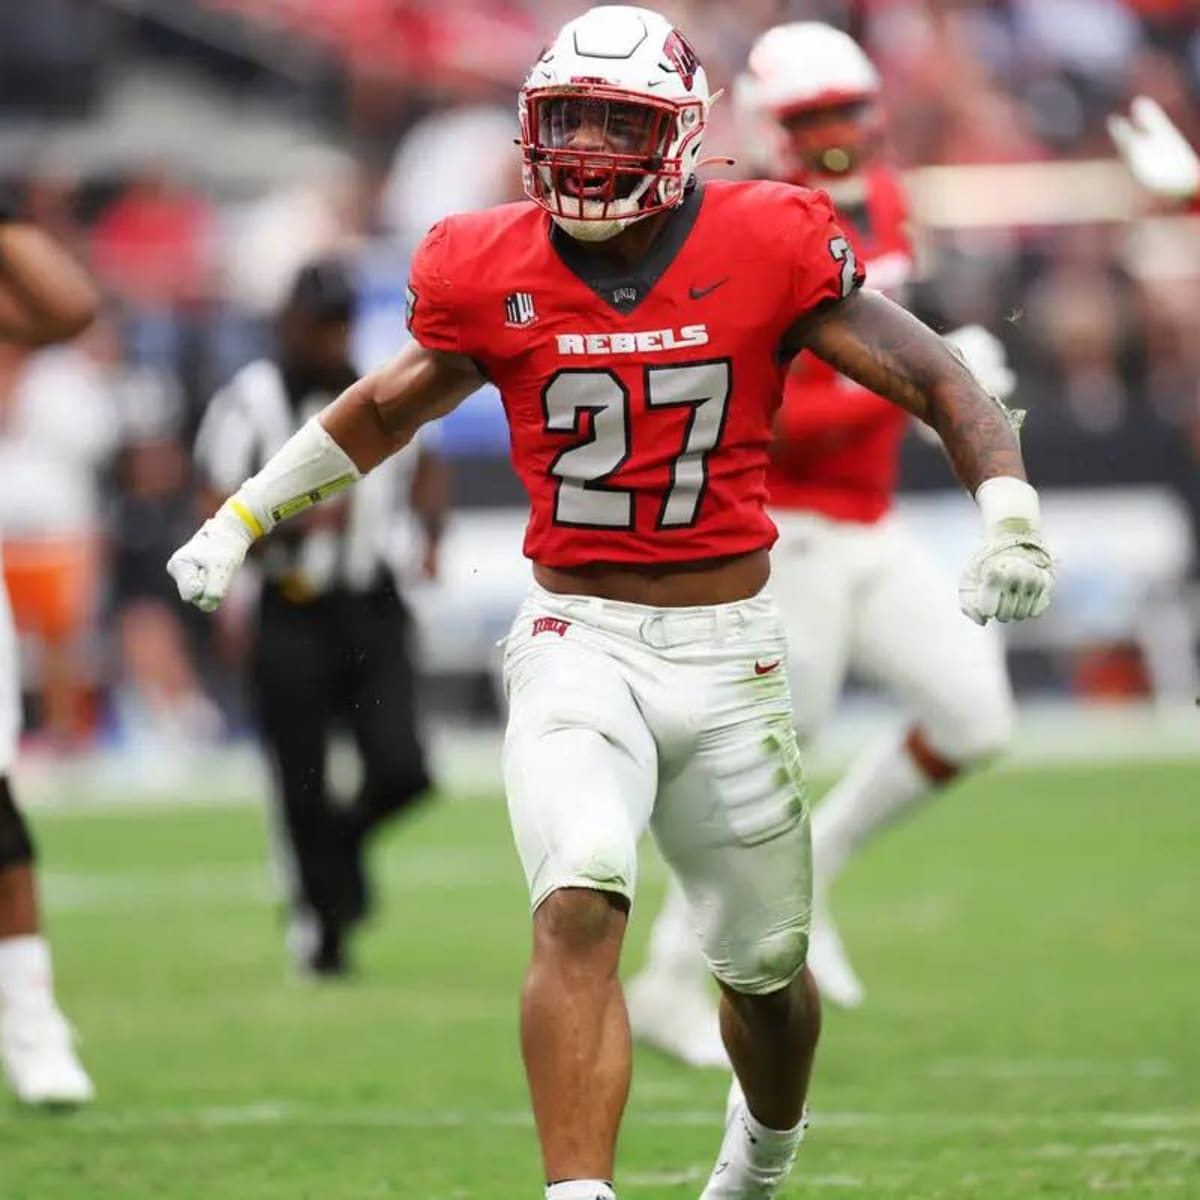 NFL Draft Profile: Austin Ajiake, Linebacker, UNLV Rebels - Visit NFL Draft  on Sports Illustrated, the latest news coverage, with rankings for NFL  Draft prospects, College Football, Dynasty and Devy Fantasy Football.